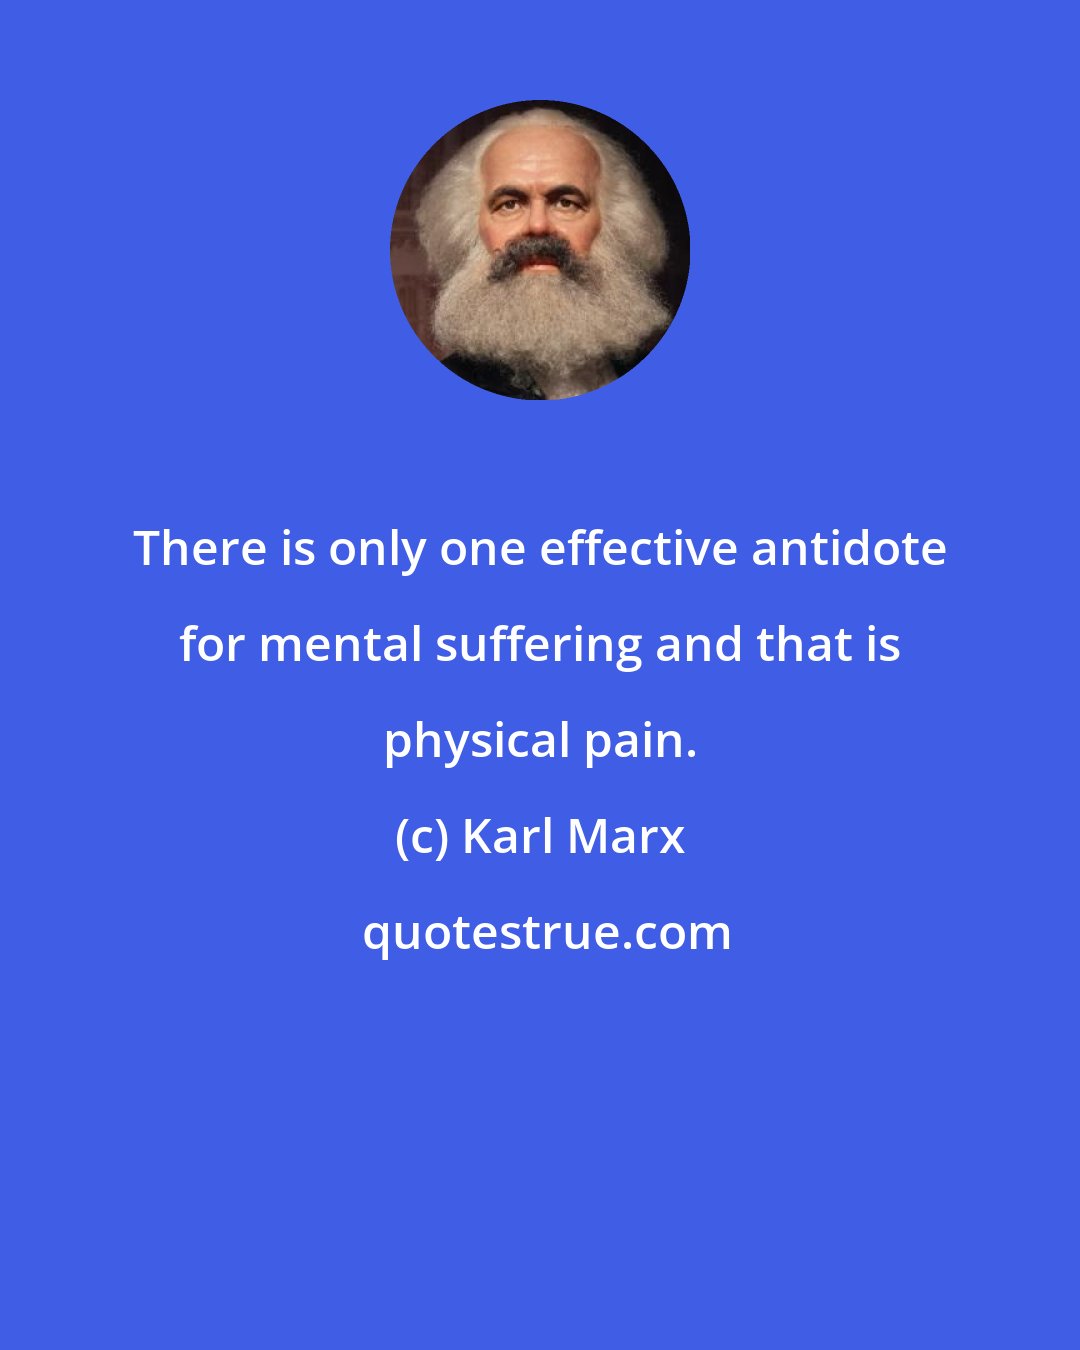 Karl Marx: There is only one effective antidote for mental suffering and that is physical pain.